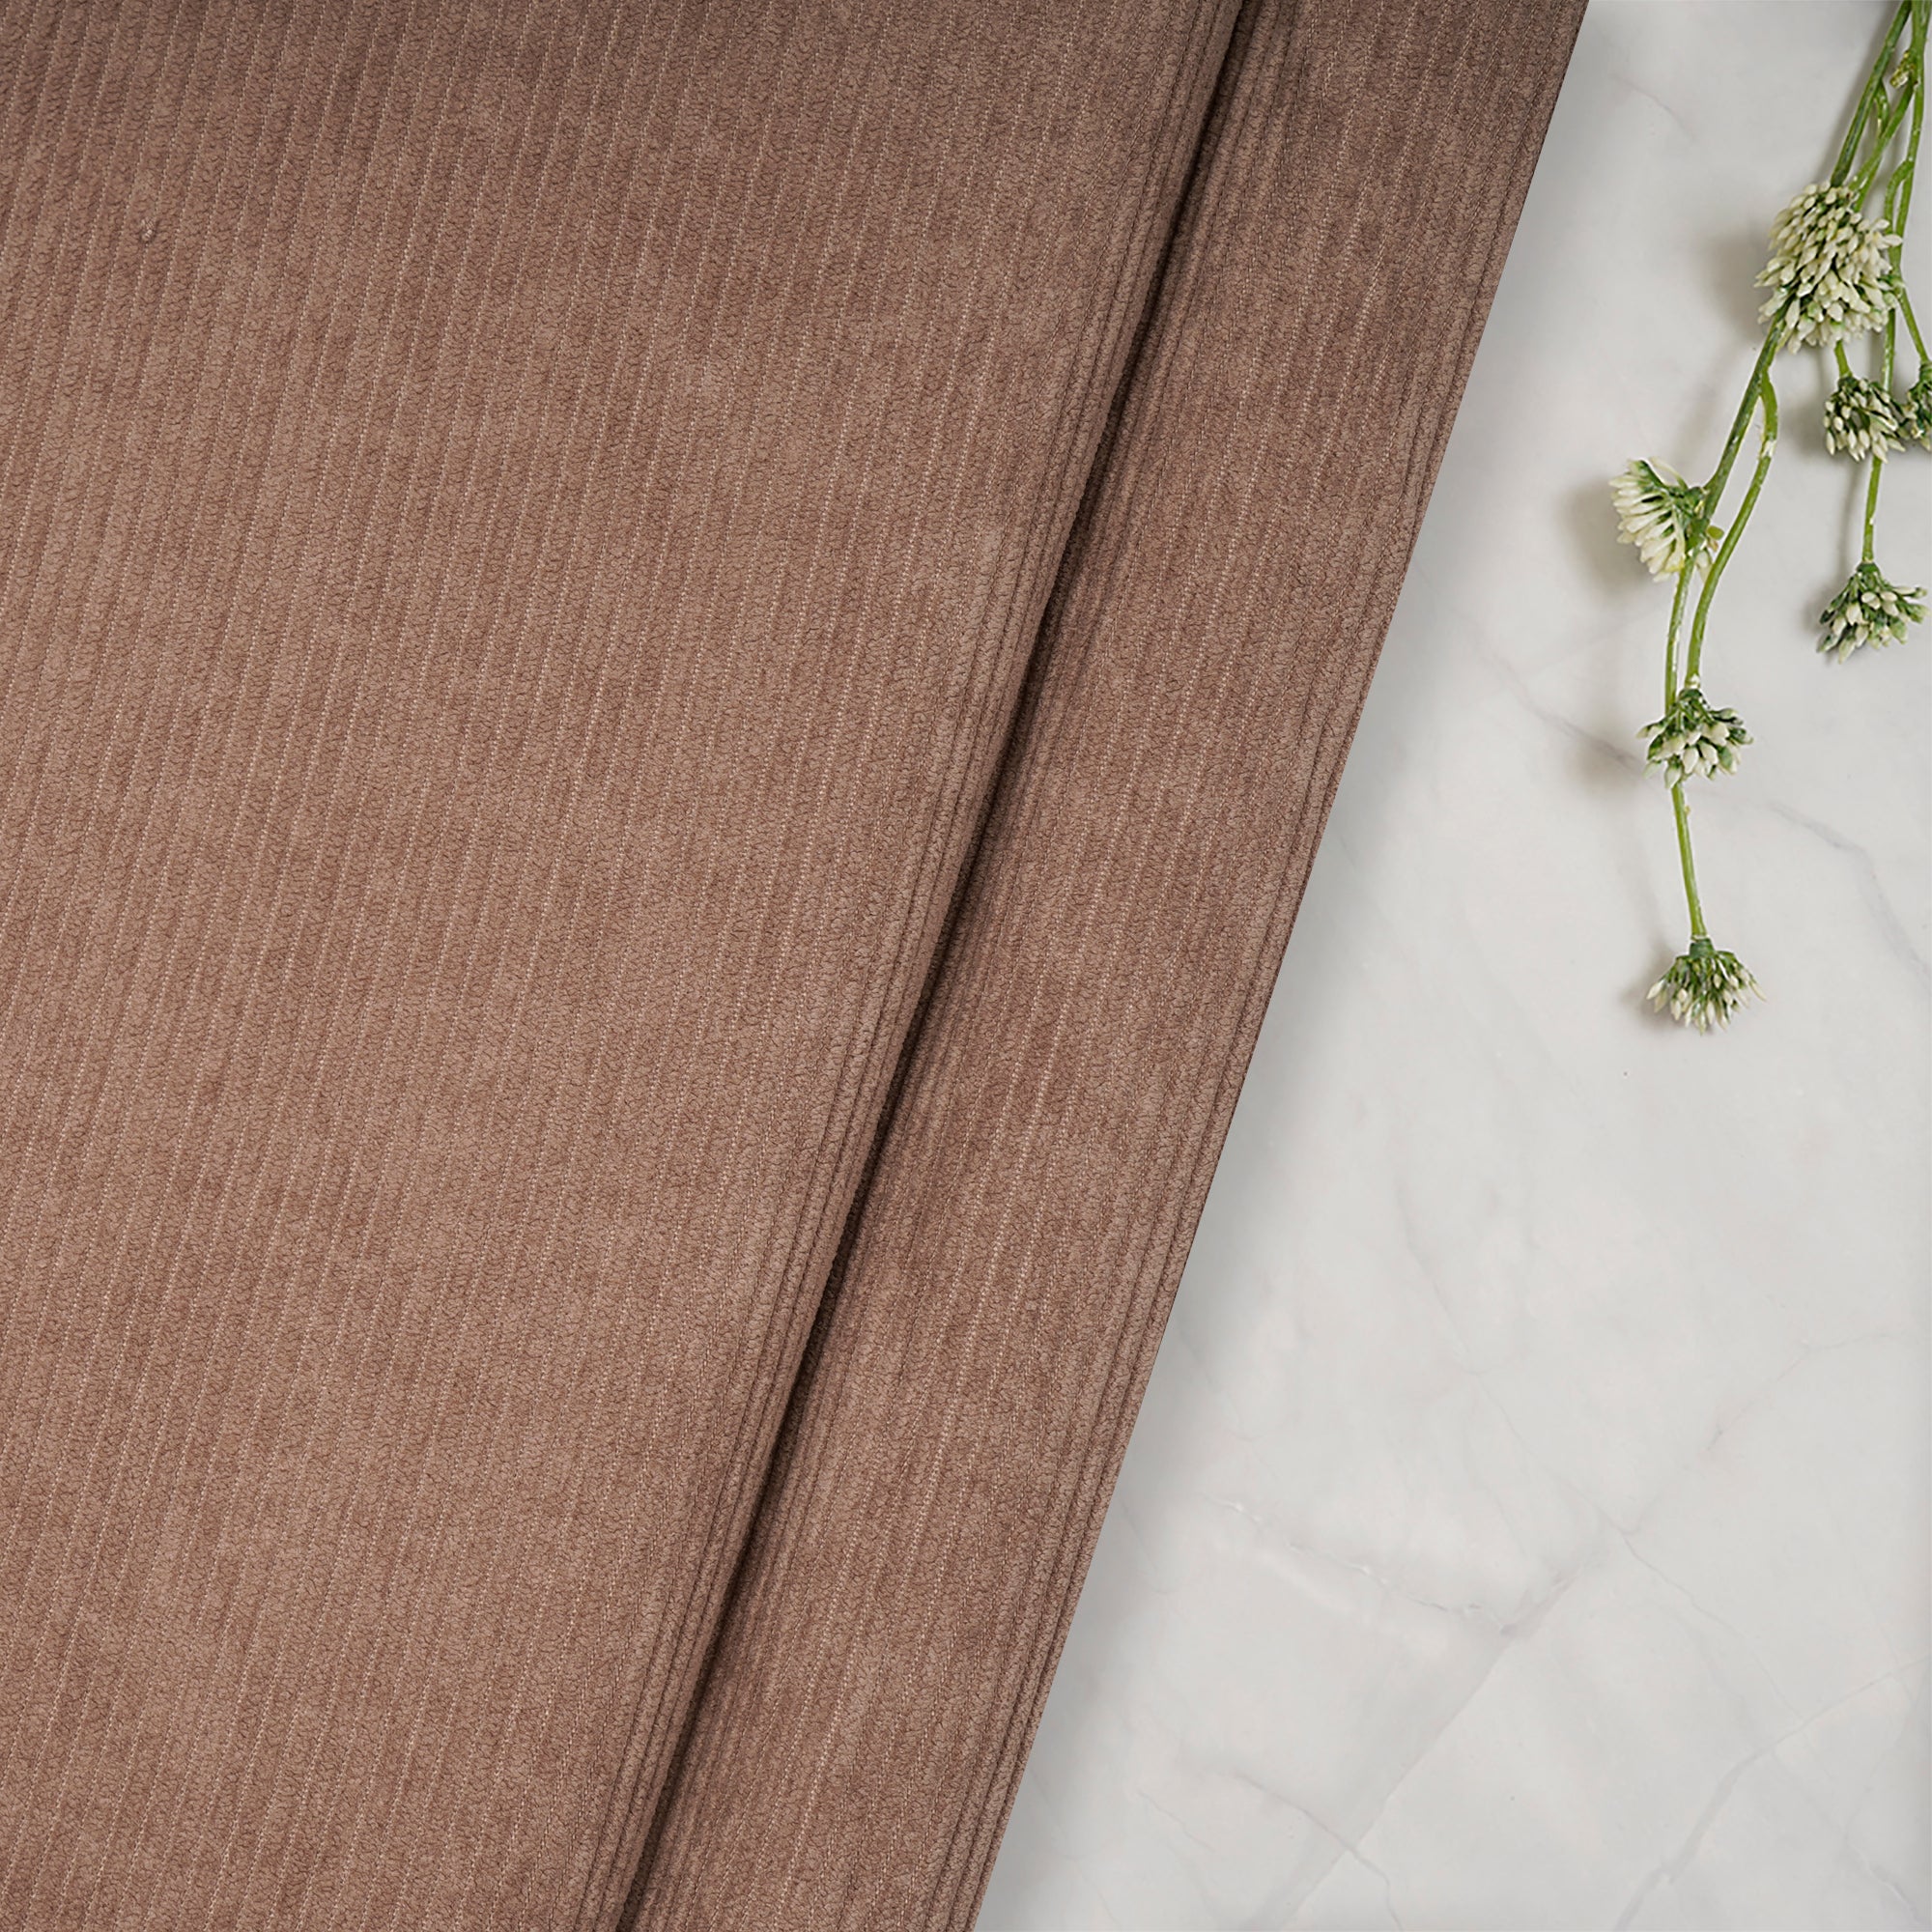 Warm Taupe Imported Cotton Corduroy Fabric (60" Wide)